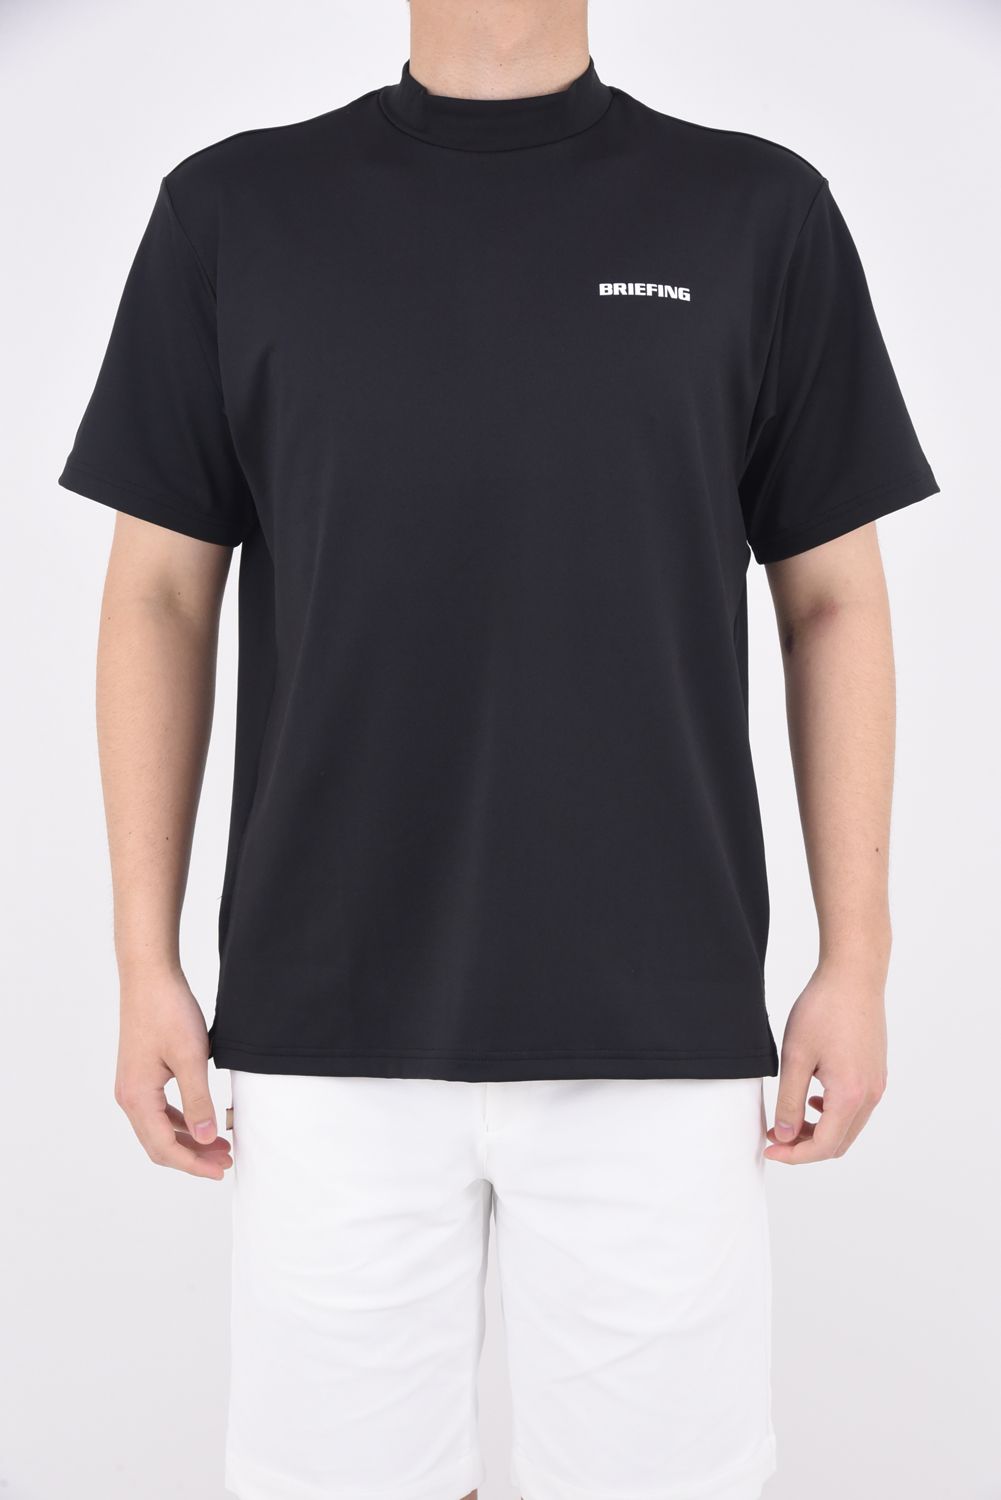 BRIEFING - MENS BACK LOGO LINE HIGH NECK RELAXED FIT